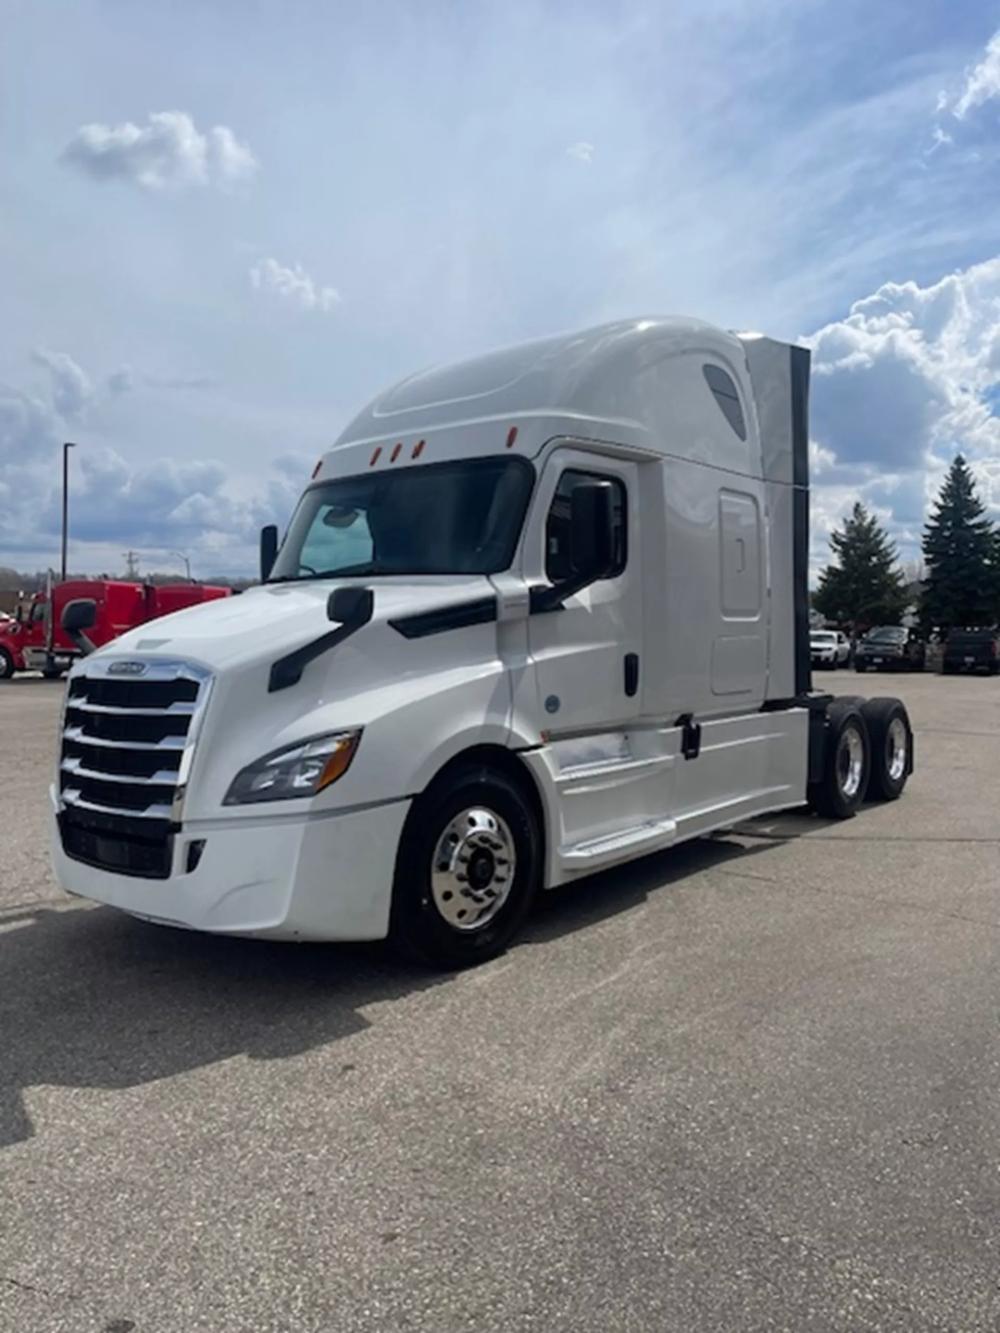 2019 Freightliner Cascadia | Photo 6 of 10